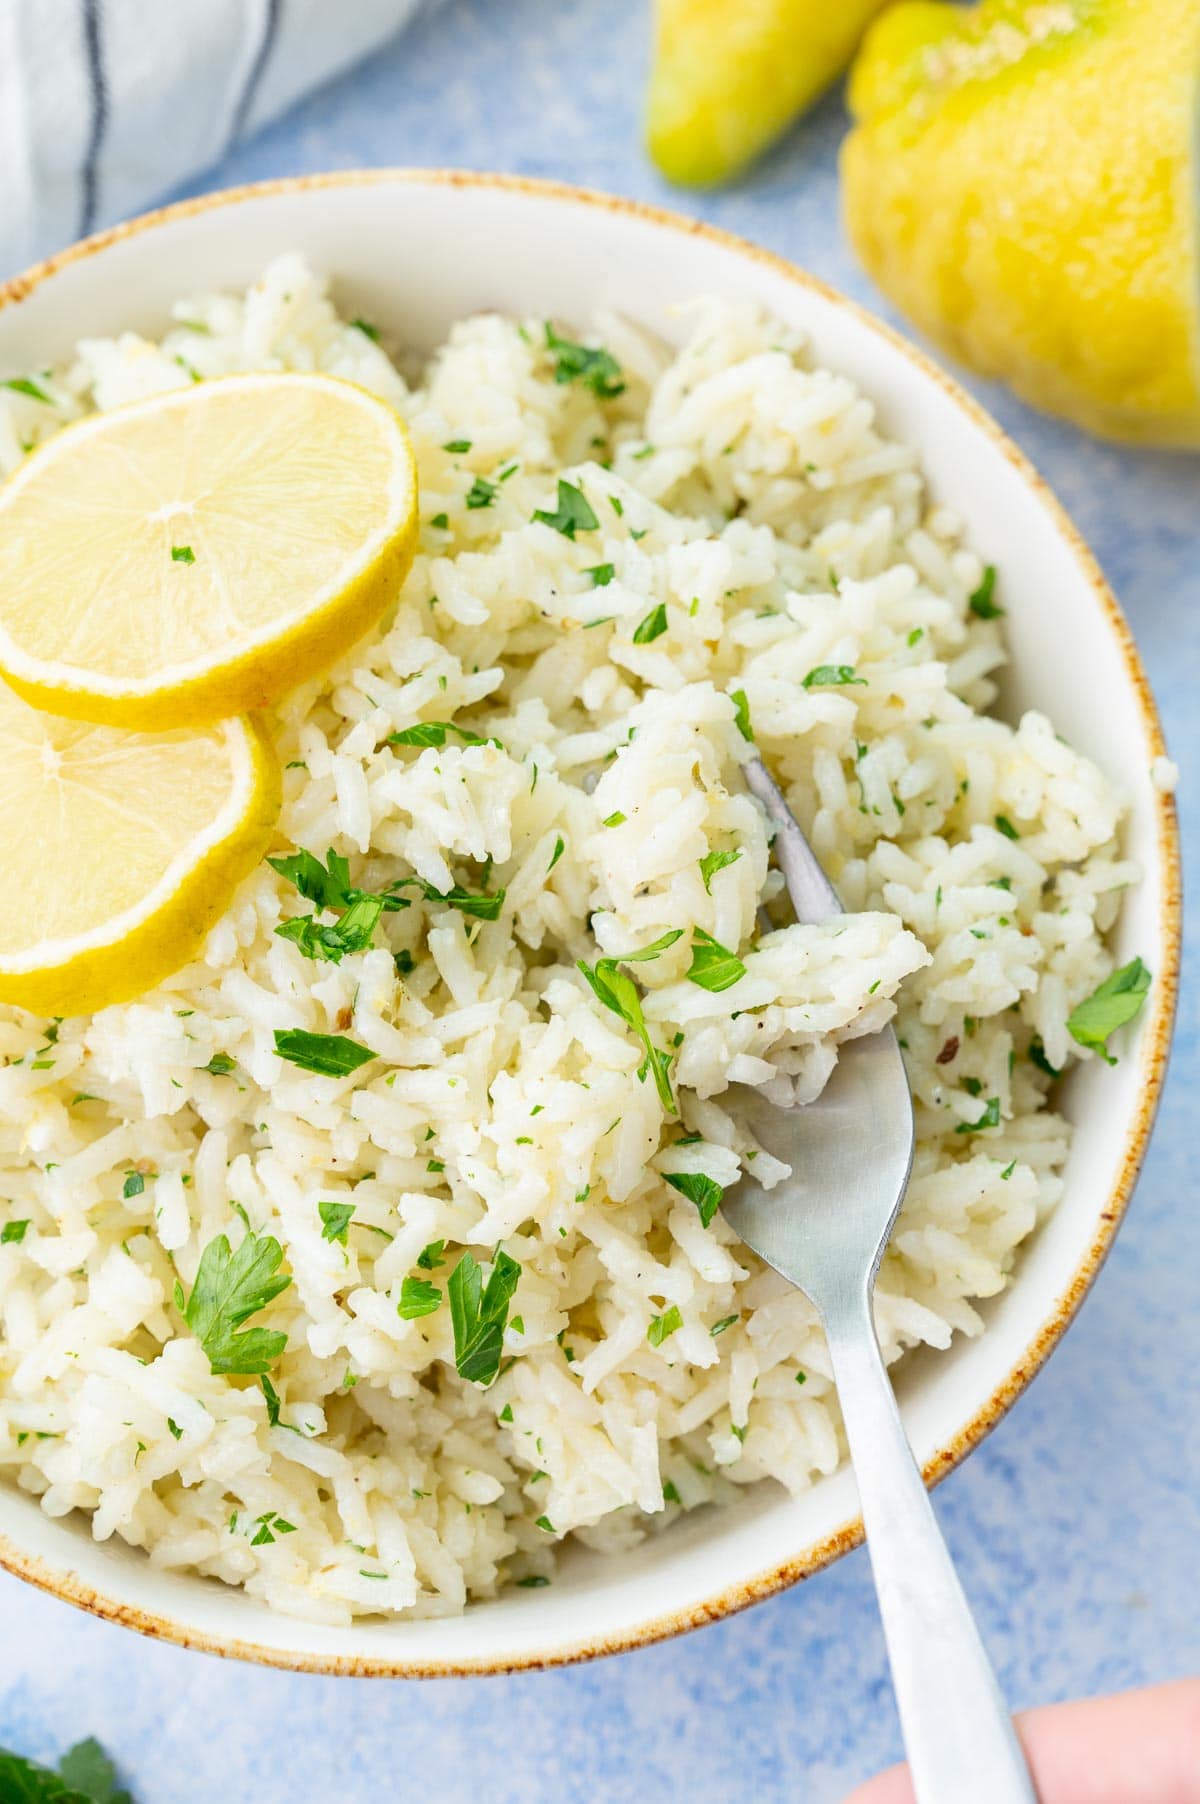 Lemon rice in a white bowl, topped with lemon slices and chopped parsley. A fork on the side.